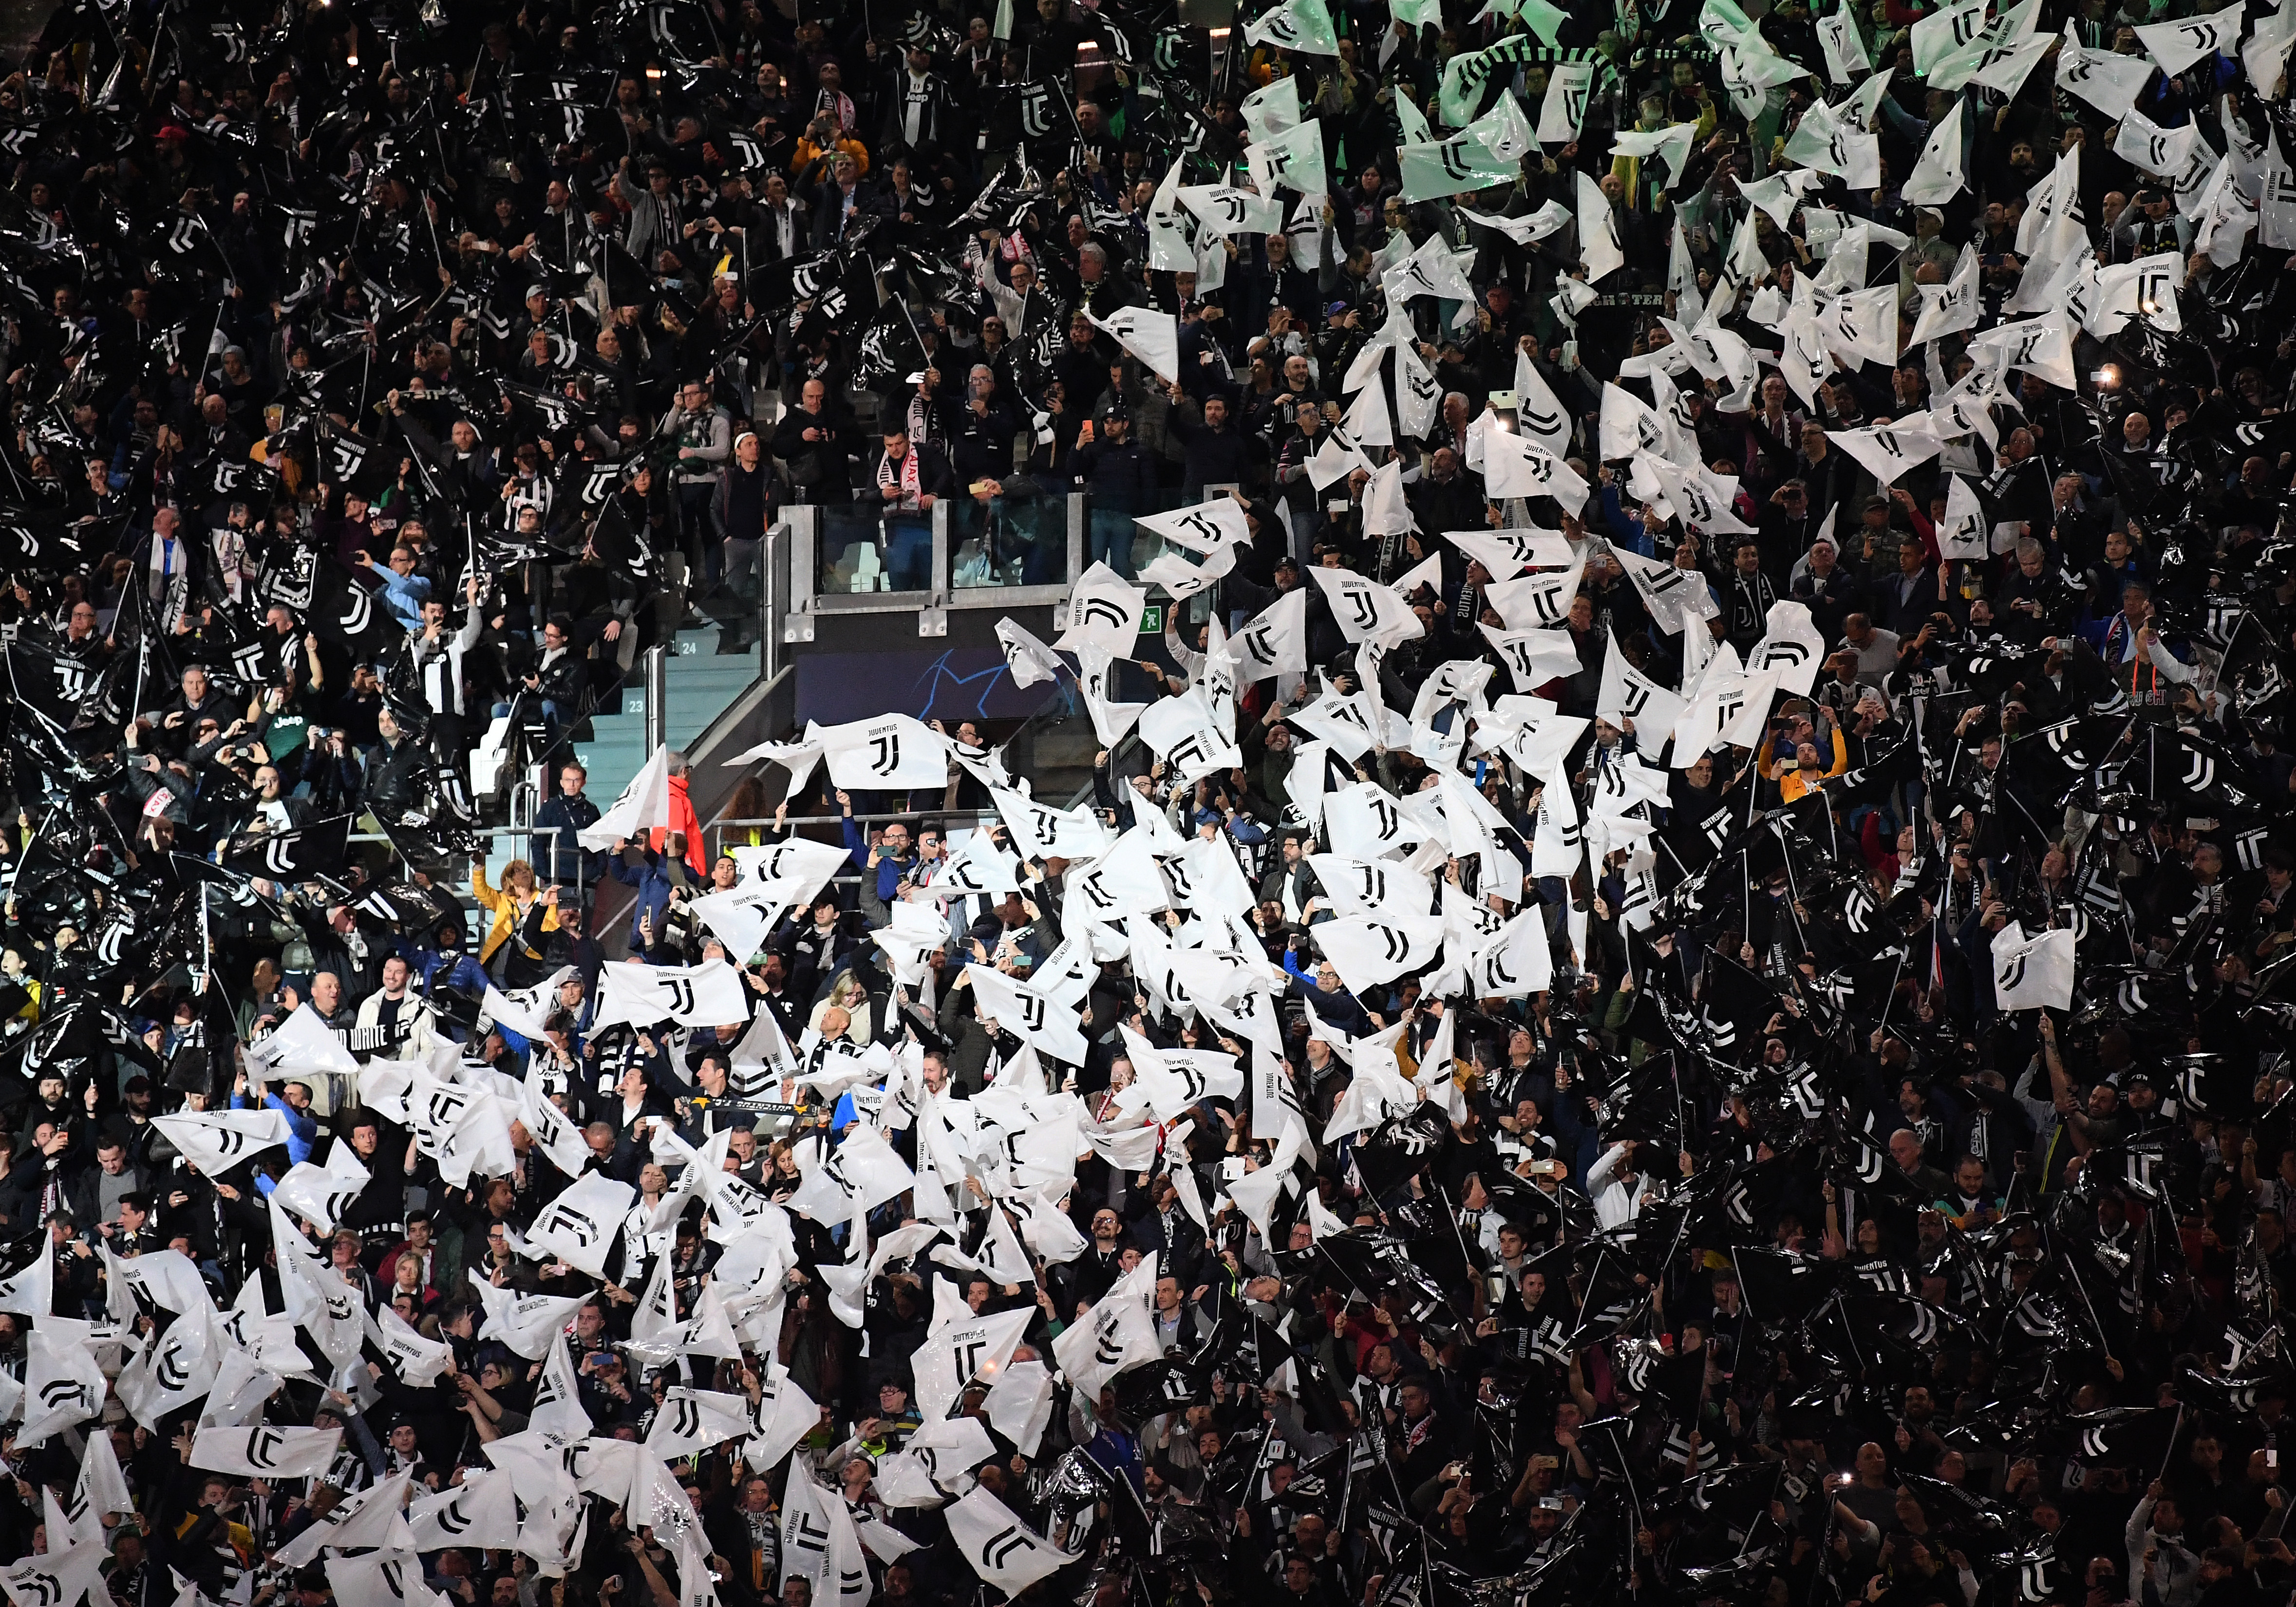 TURIN, ITALY - APRIL 16: Fans of Juventus wave flags during the UEFA Champions League Quarter Final second leg match between Juventus and Ajax at Juventus Stadium on April 16, 2019 in Turin, Italy. (Photo by Stuart Franklin/Getty Images)